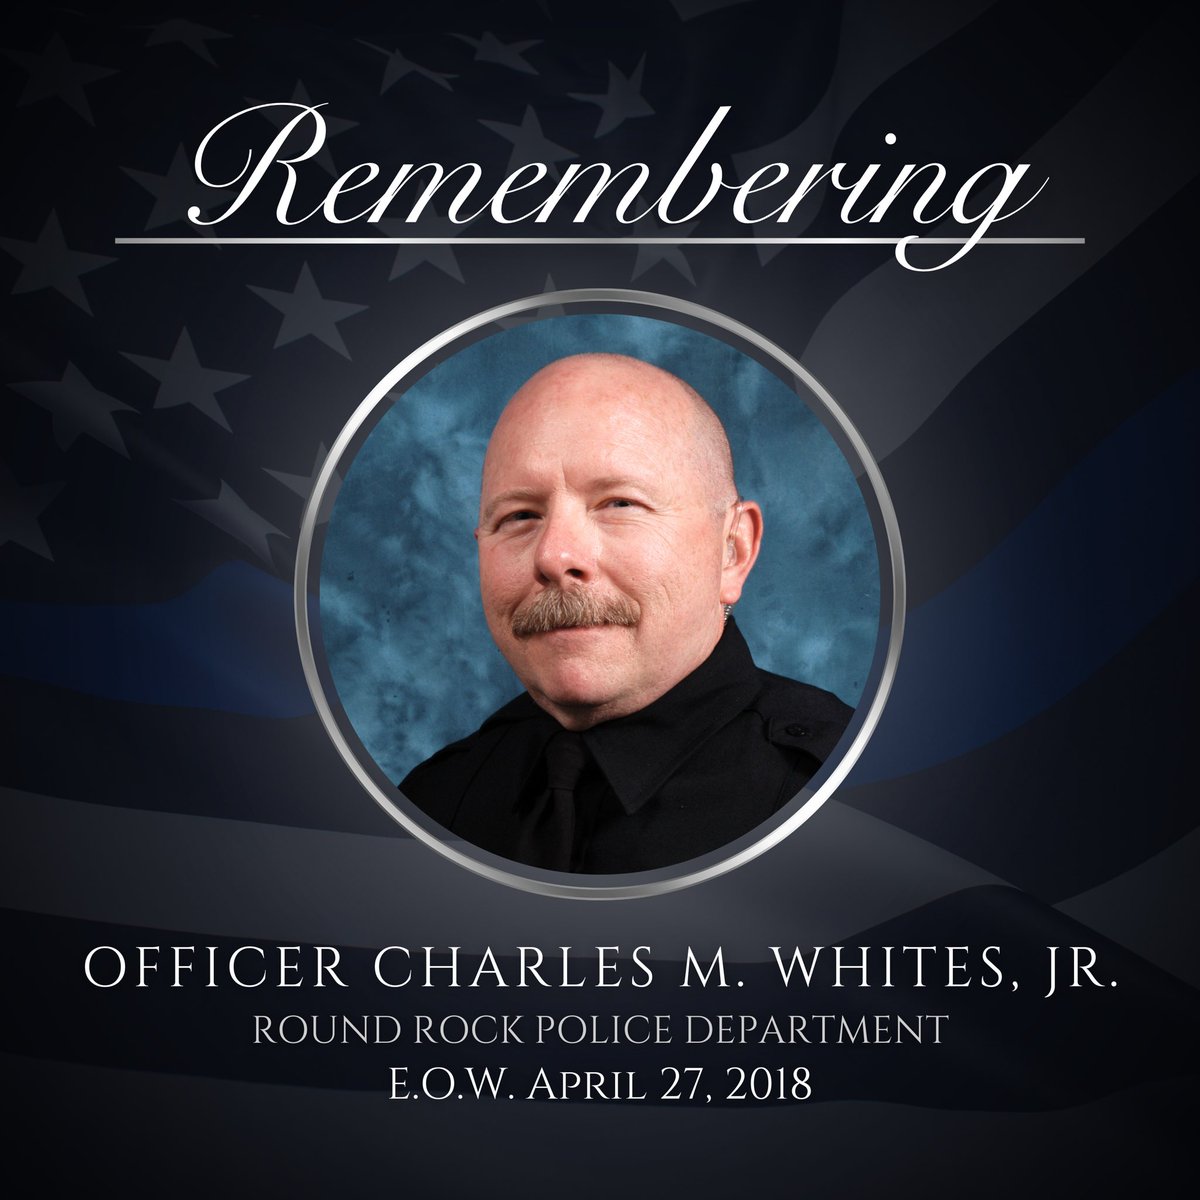 Honoring the life of Officer Charles M. Whites, Jr. On February 25, 2018, Officer Whites was tragically struck by a vehicle while directing traffic around a crime scene. Despite lifesaving efforts, he sadly succumbed to his injuries on April 27, 2018. Officer Whites dedicated…